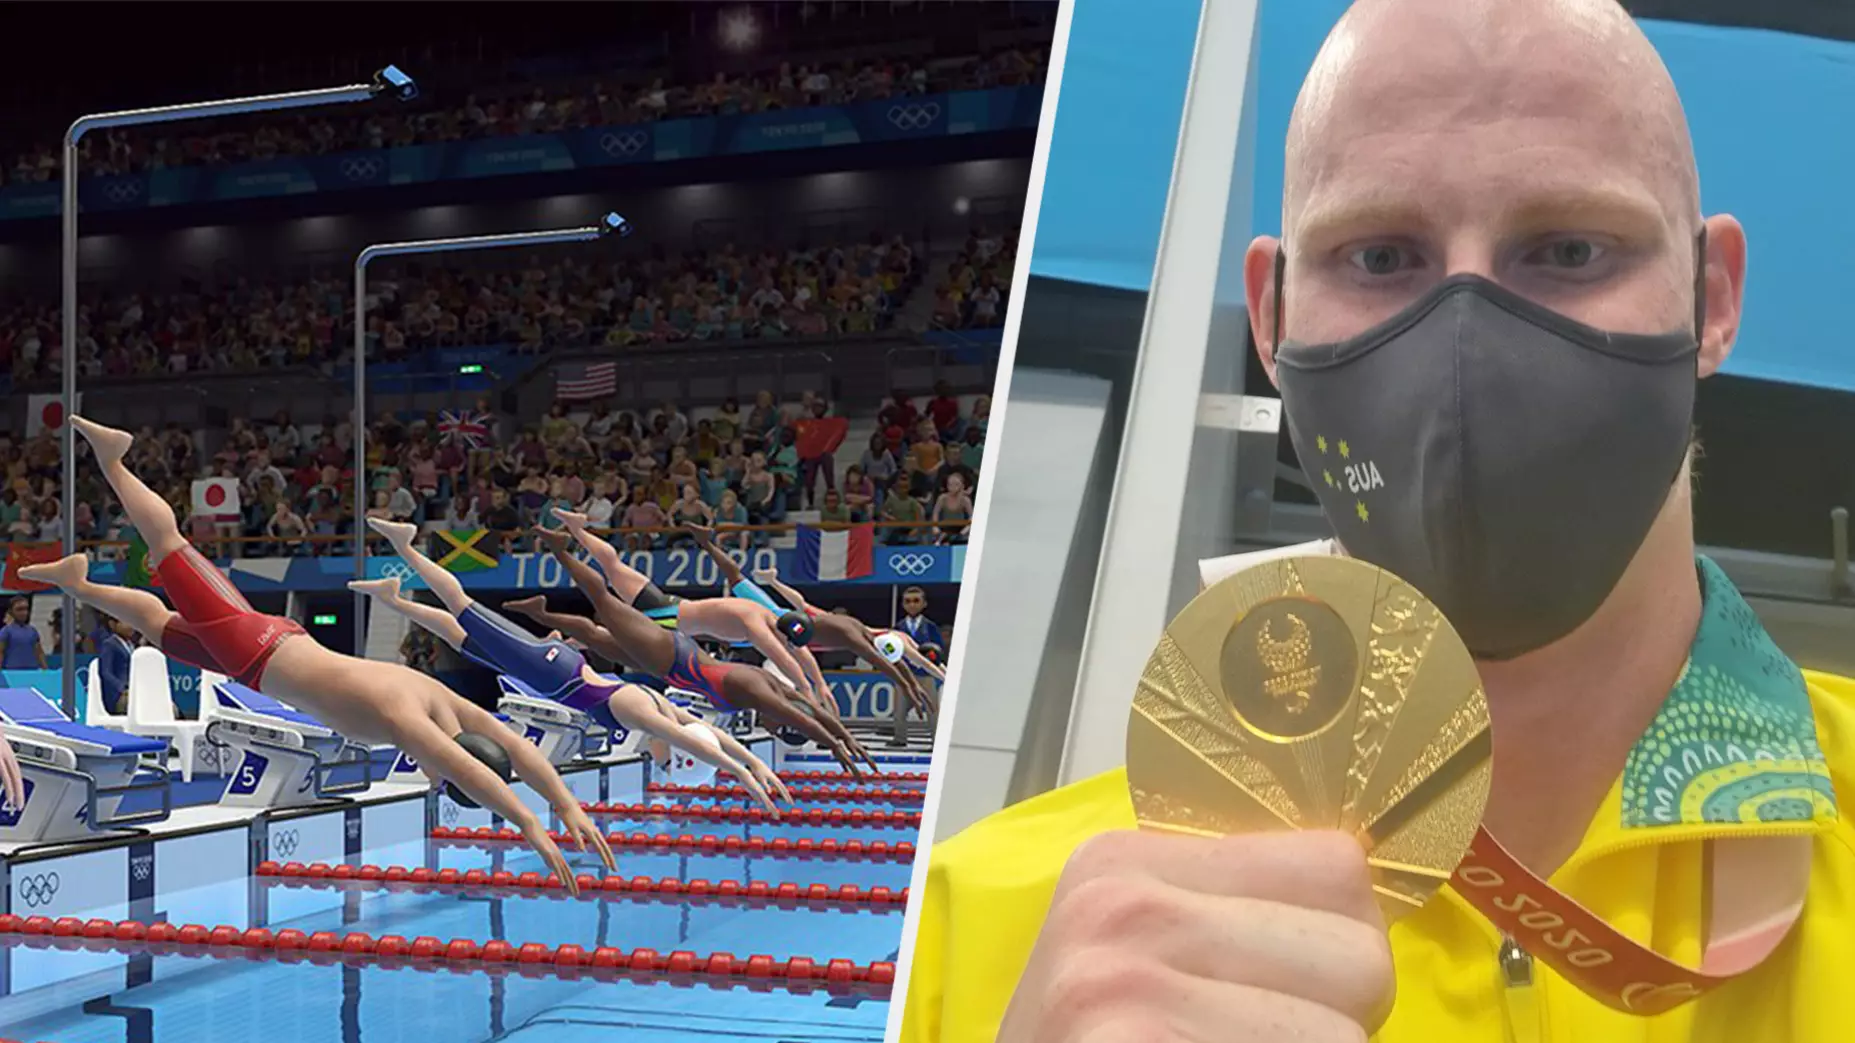 Former Twitch Streamer And Pro Gamer Wins Gold At Paralympics